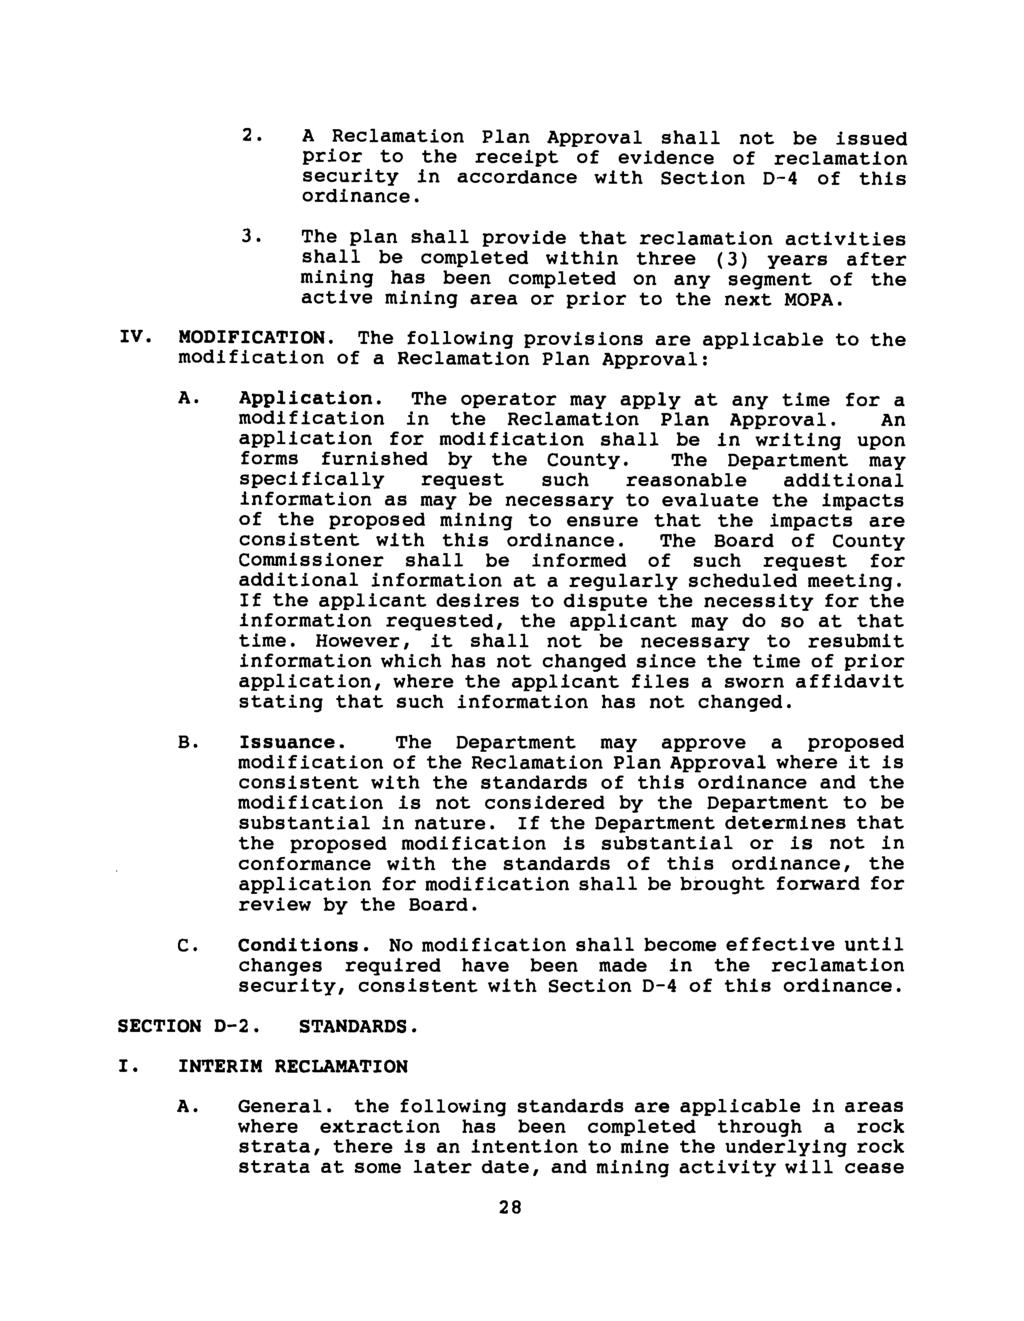 2. A Reclamation Plan Approval shall not be issued prior to the receipt of evidence of reclamation security in accordance with Section D-4 of this ordinance. 3.